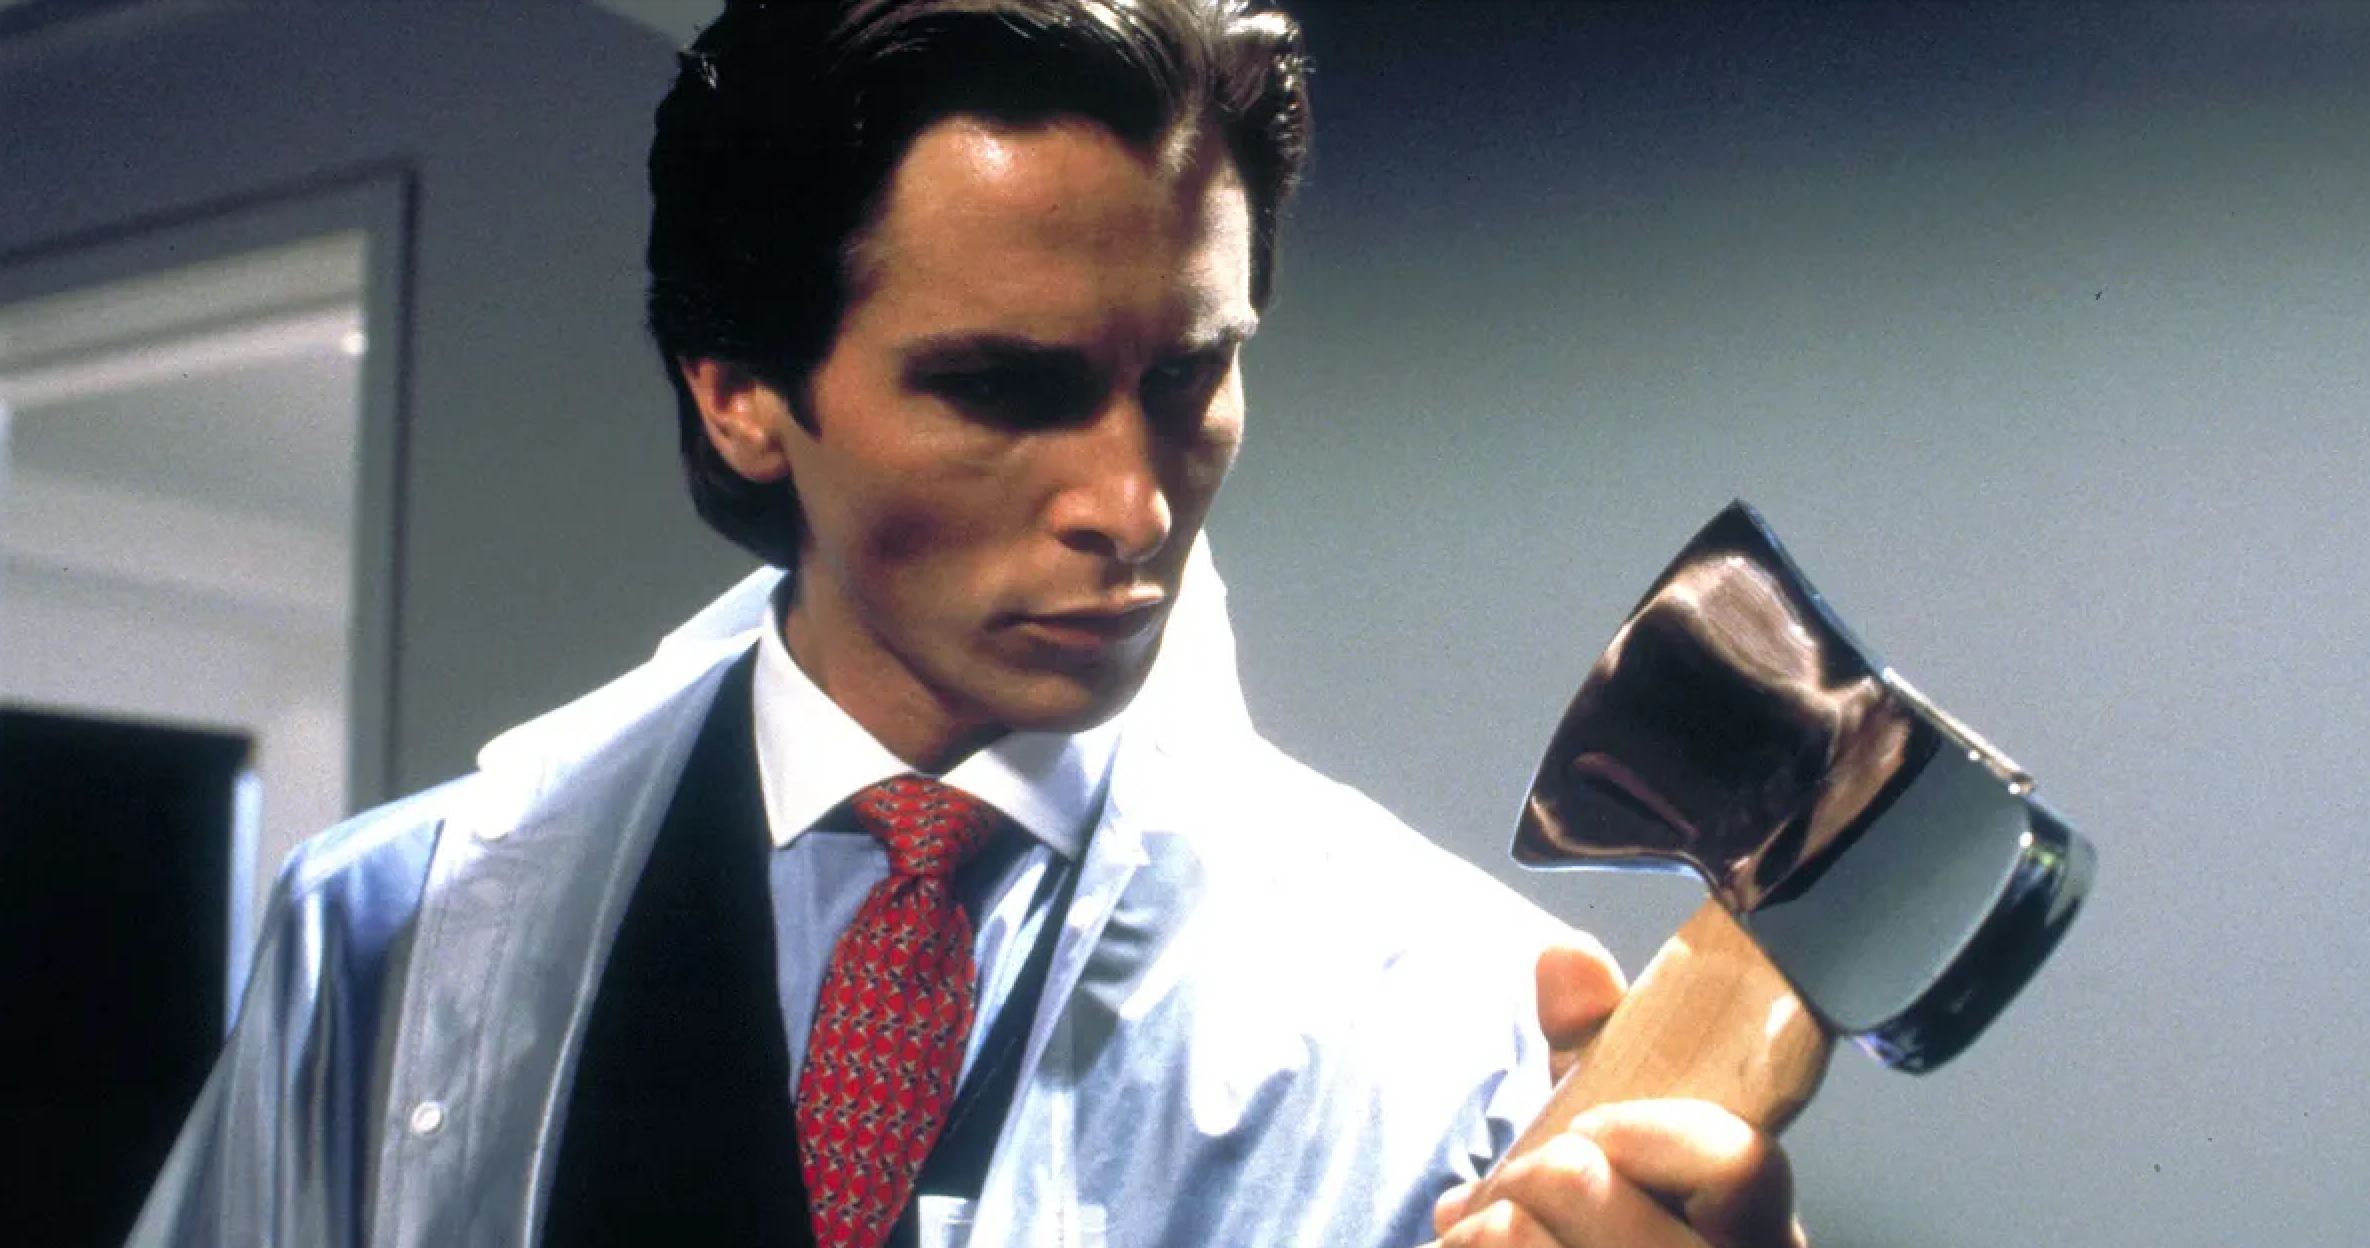 American Psycho TV Show Is Happening at Lionsgate